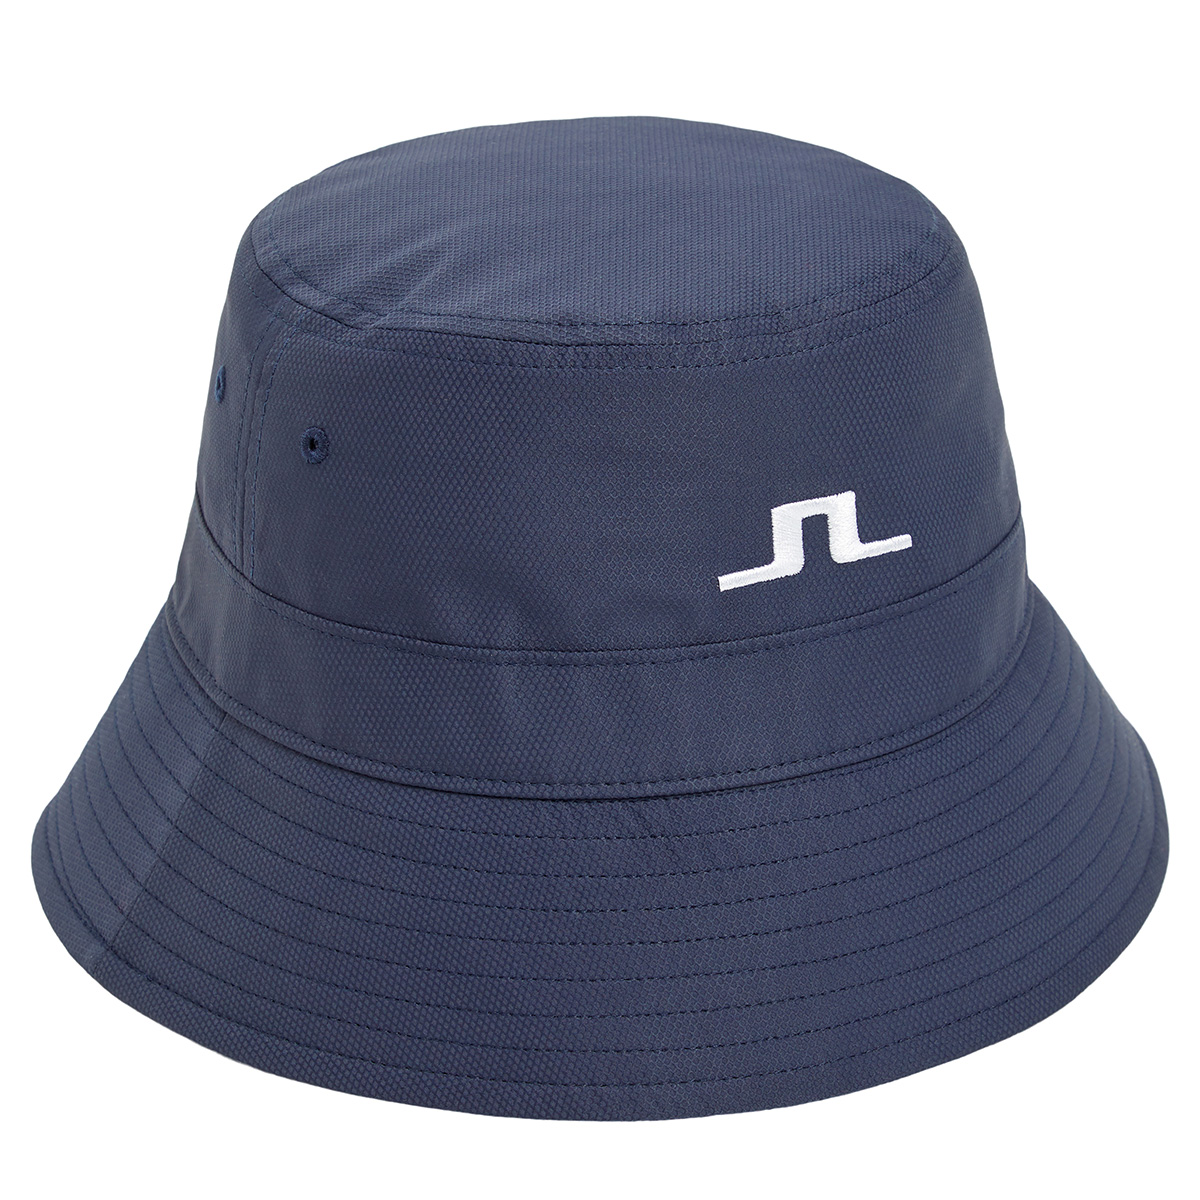 J.Lindeberg Bucket Hat from american golf